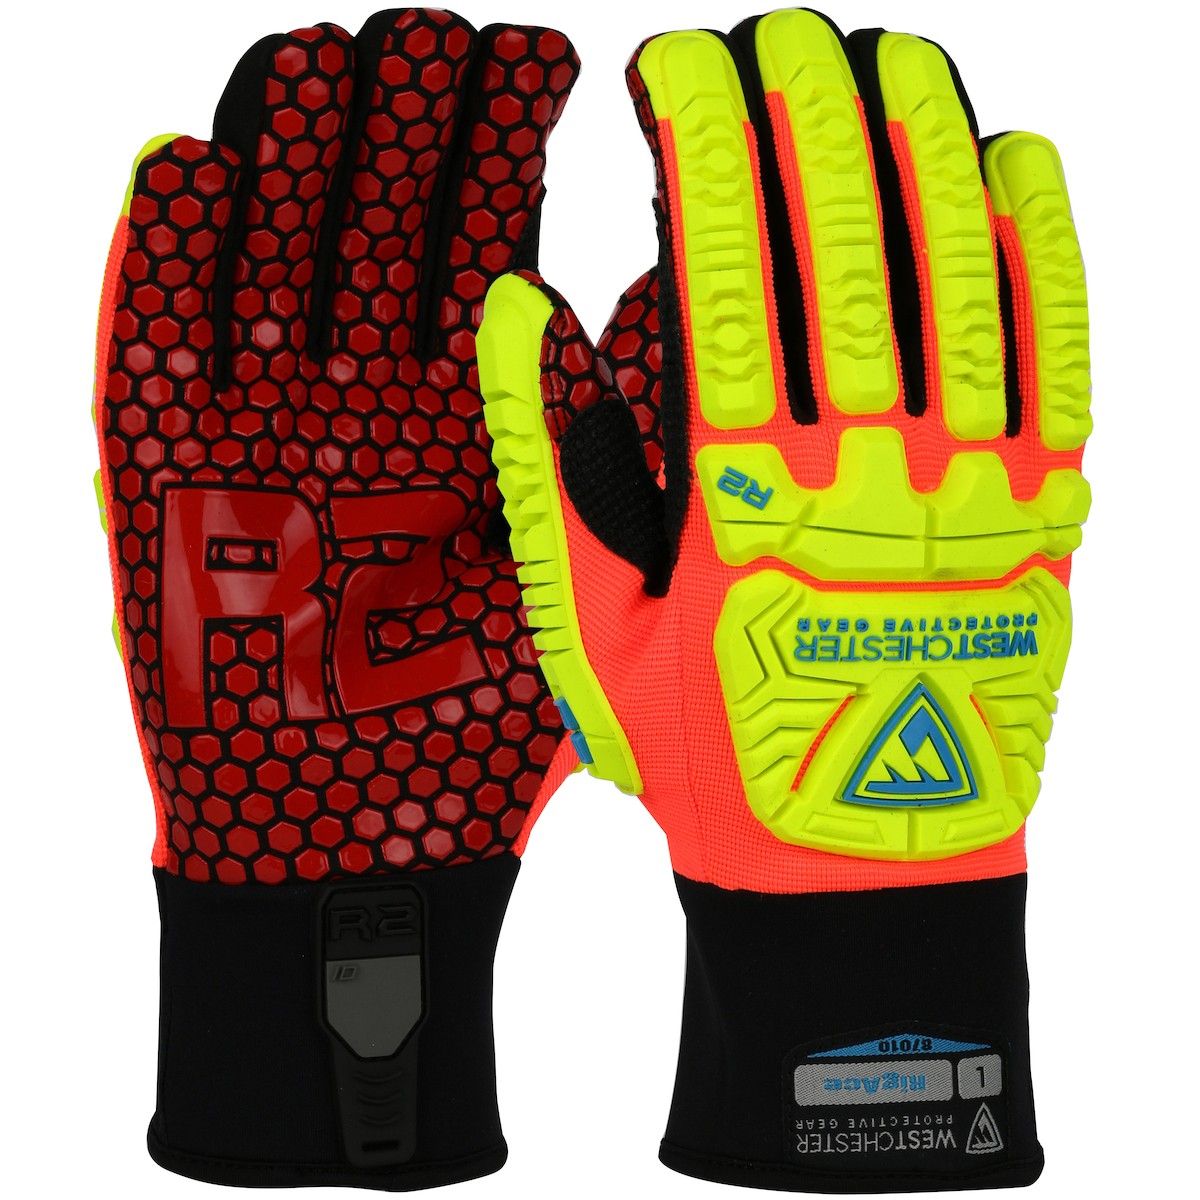 R2 RigAce™ Synthetic Leather Double Palm with Silicone Palm and Fabric Back - TPR Impact Protection  (#87010)